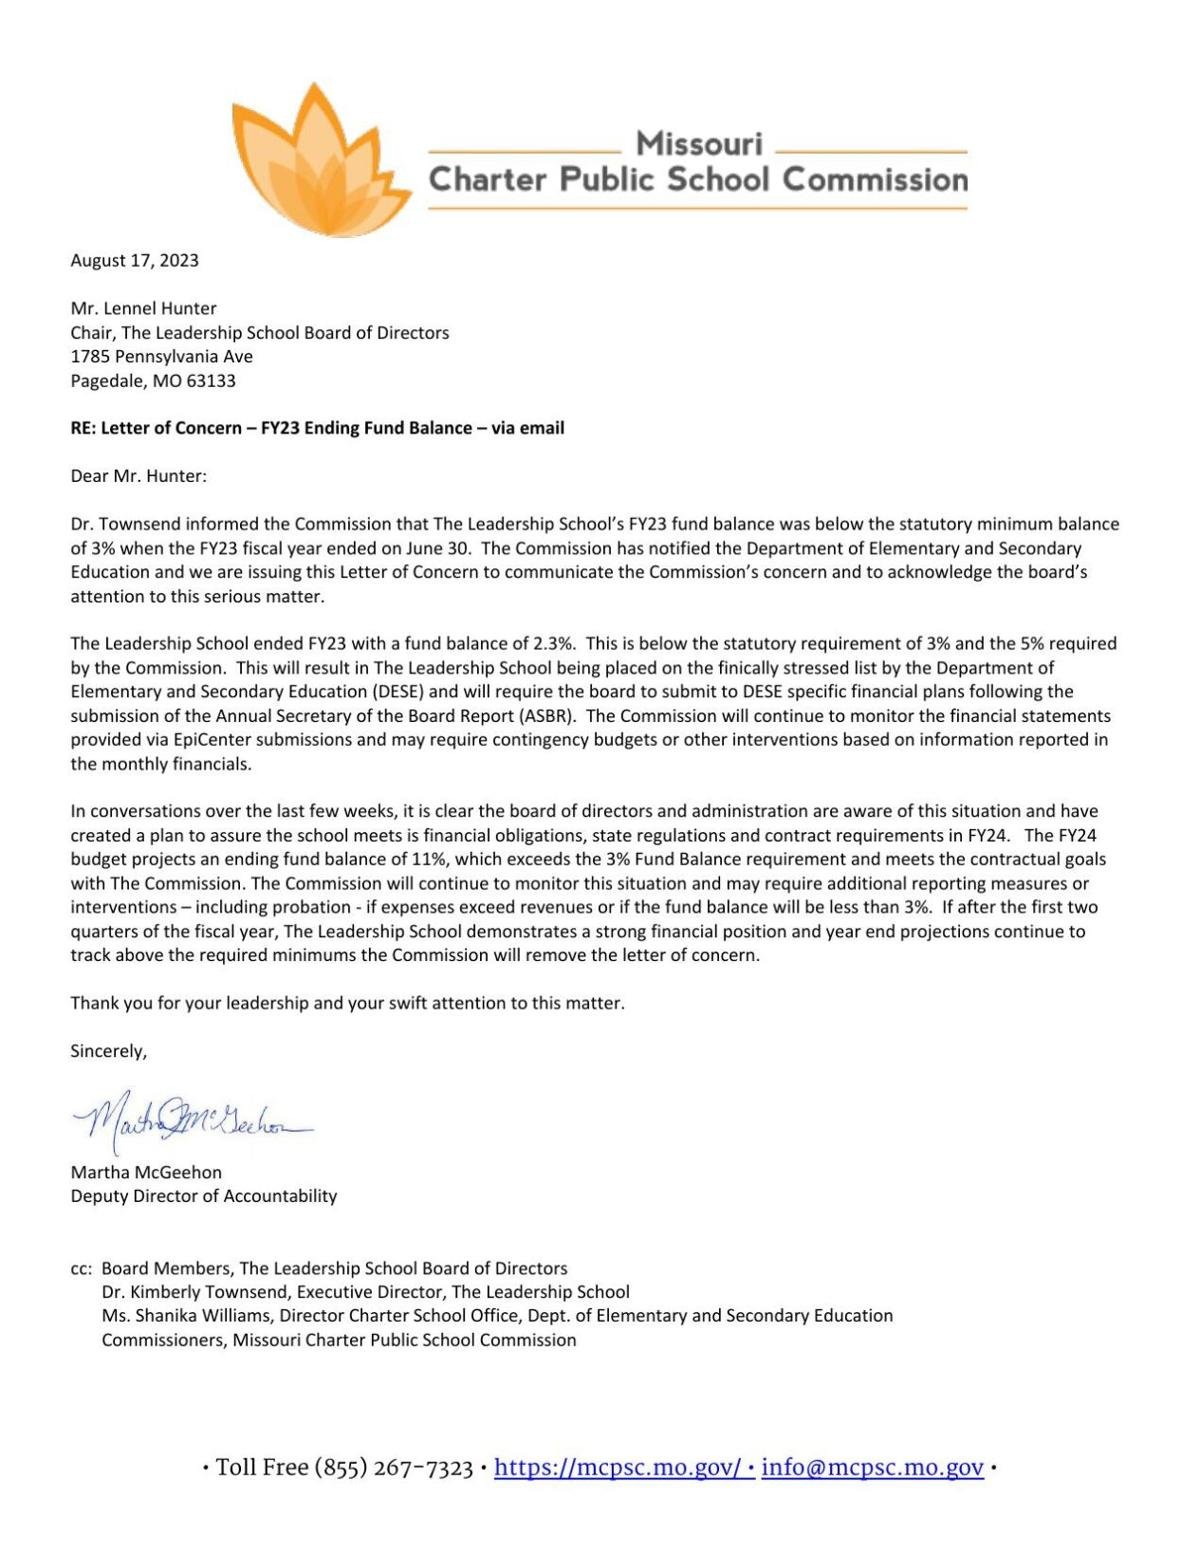 Letter of Concern - The Leadership School